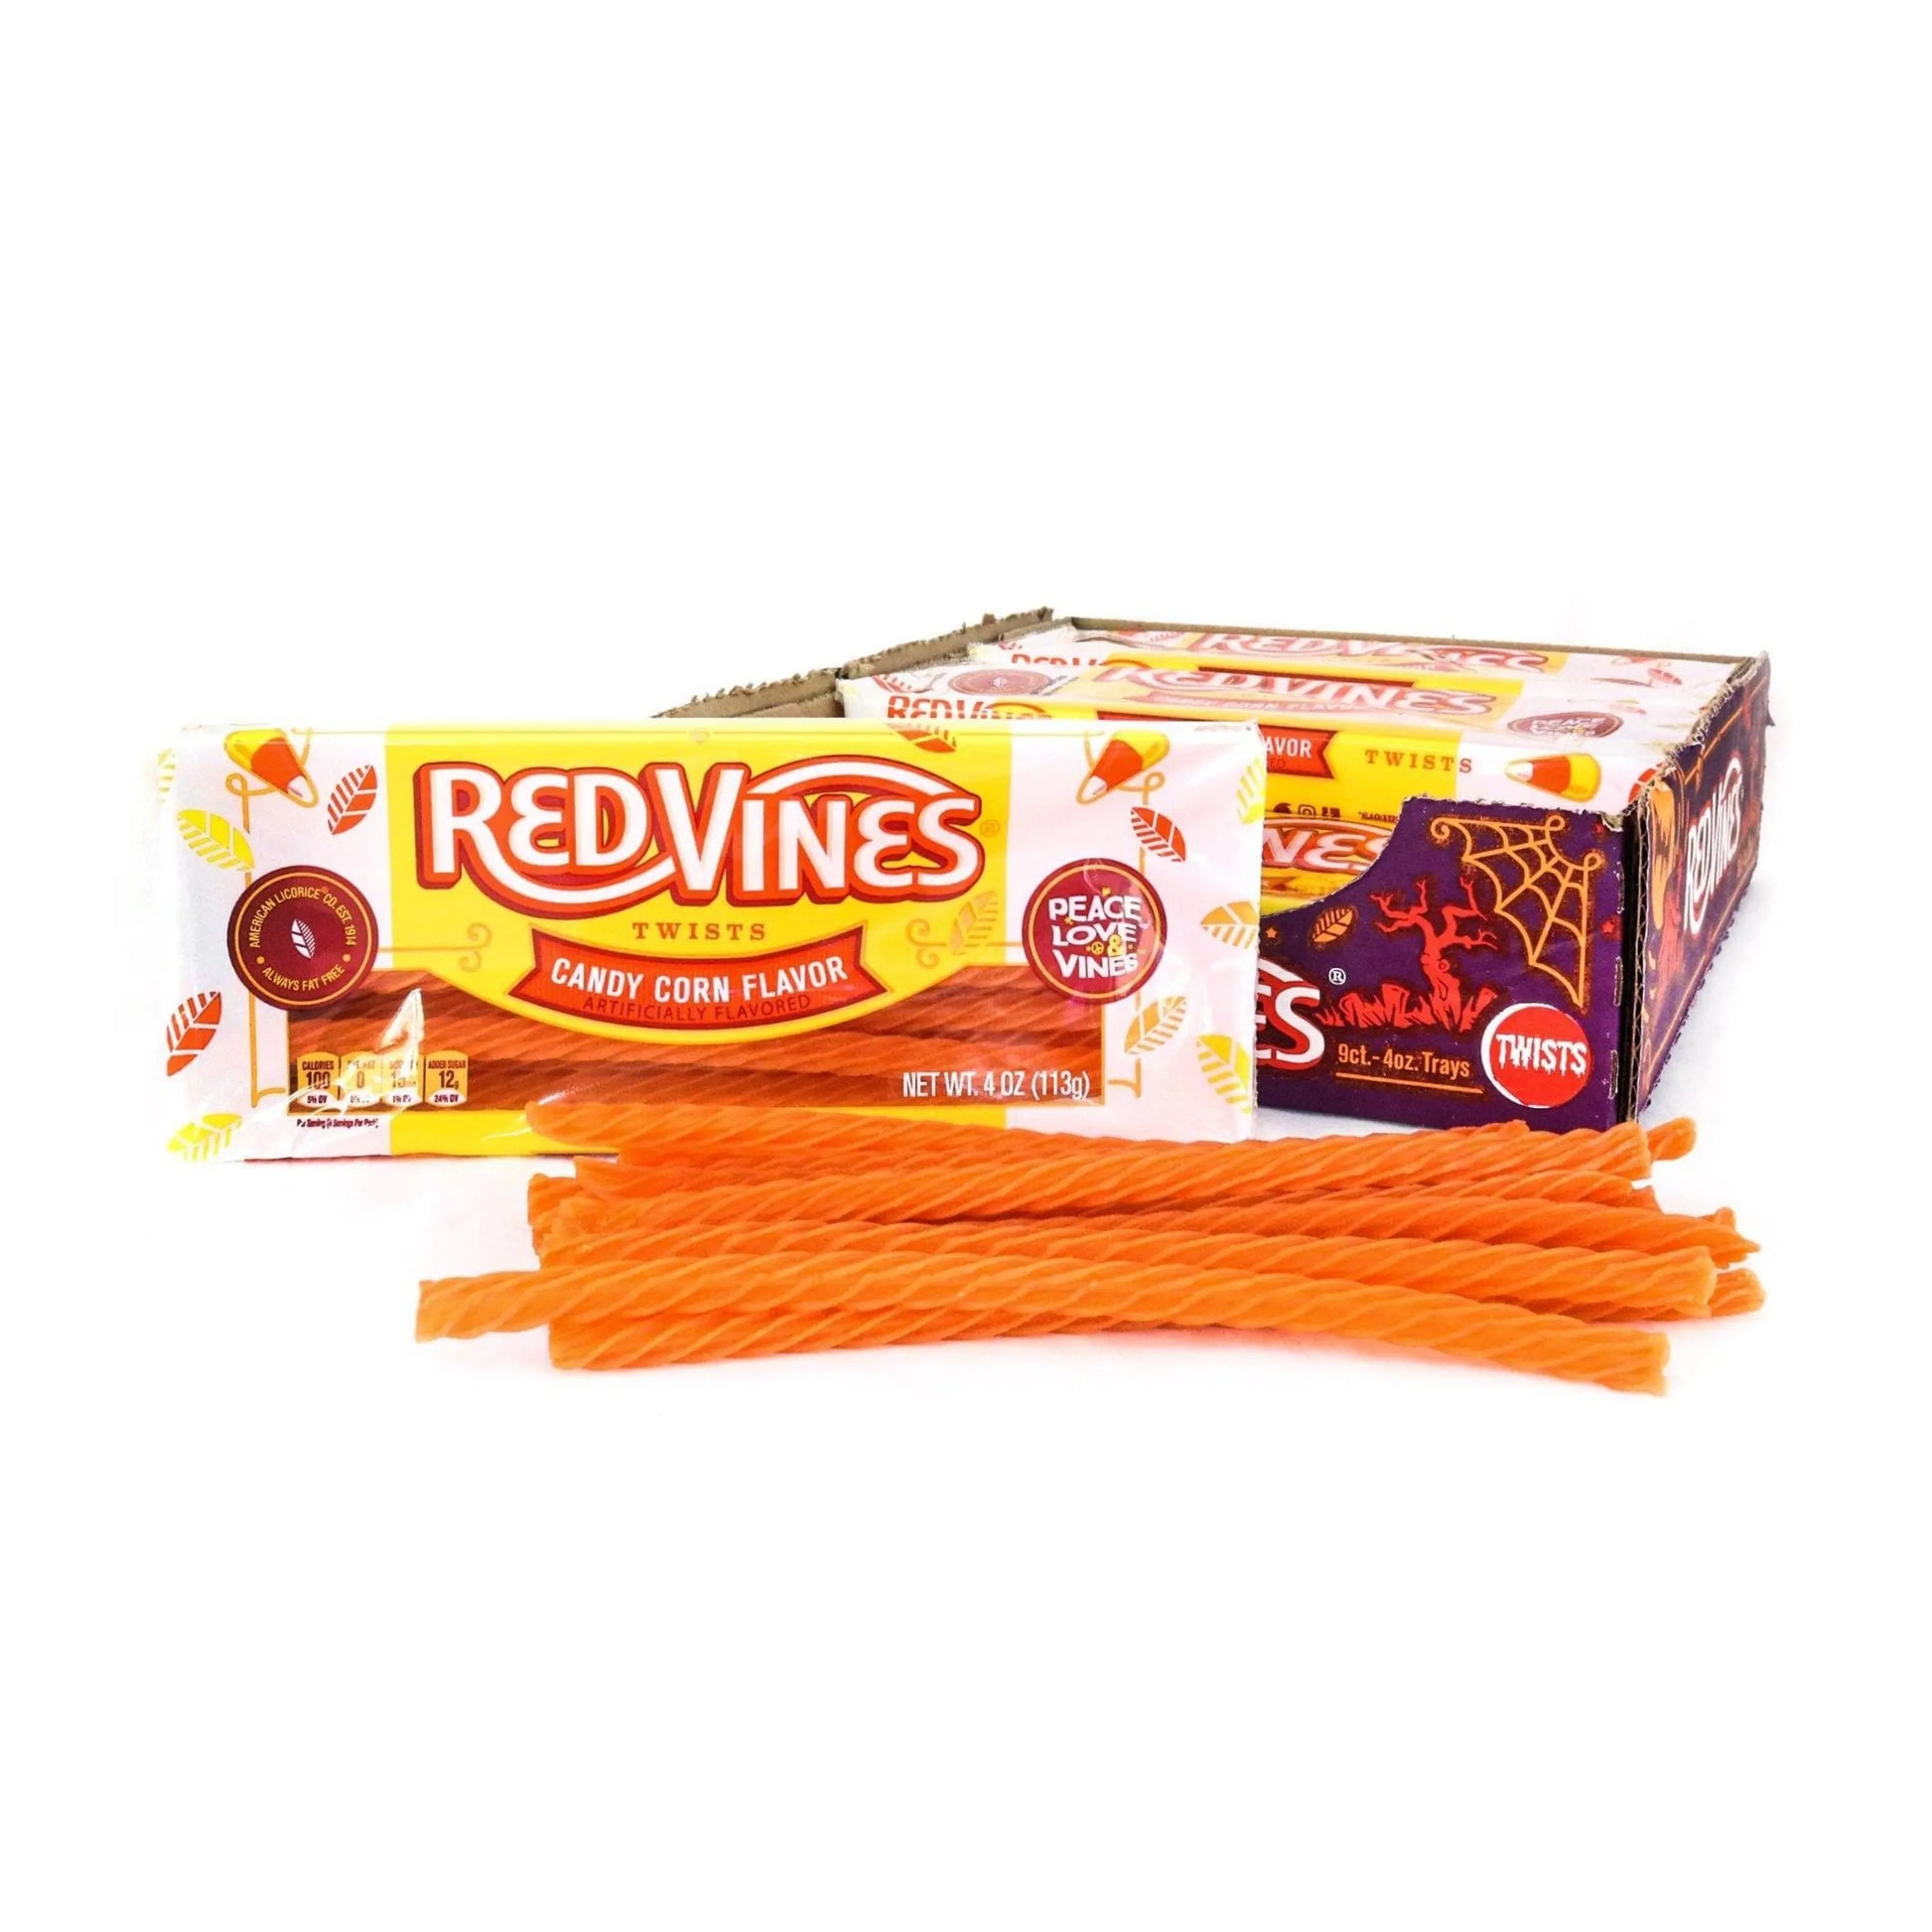 12 pack of RED VINES Candy Corn Twists, 4oz Trays